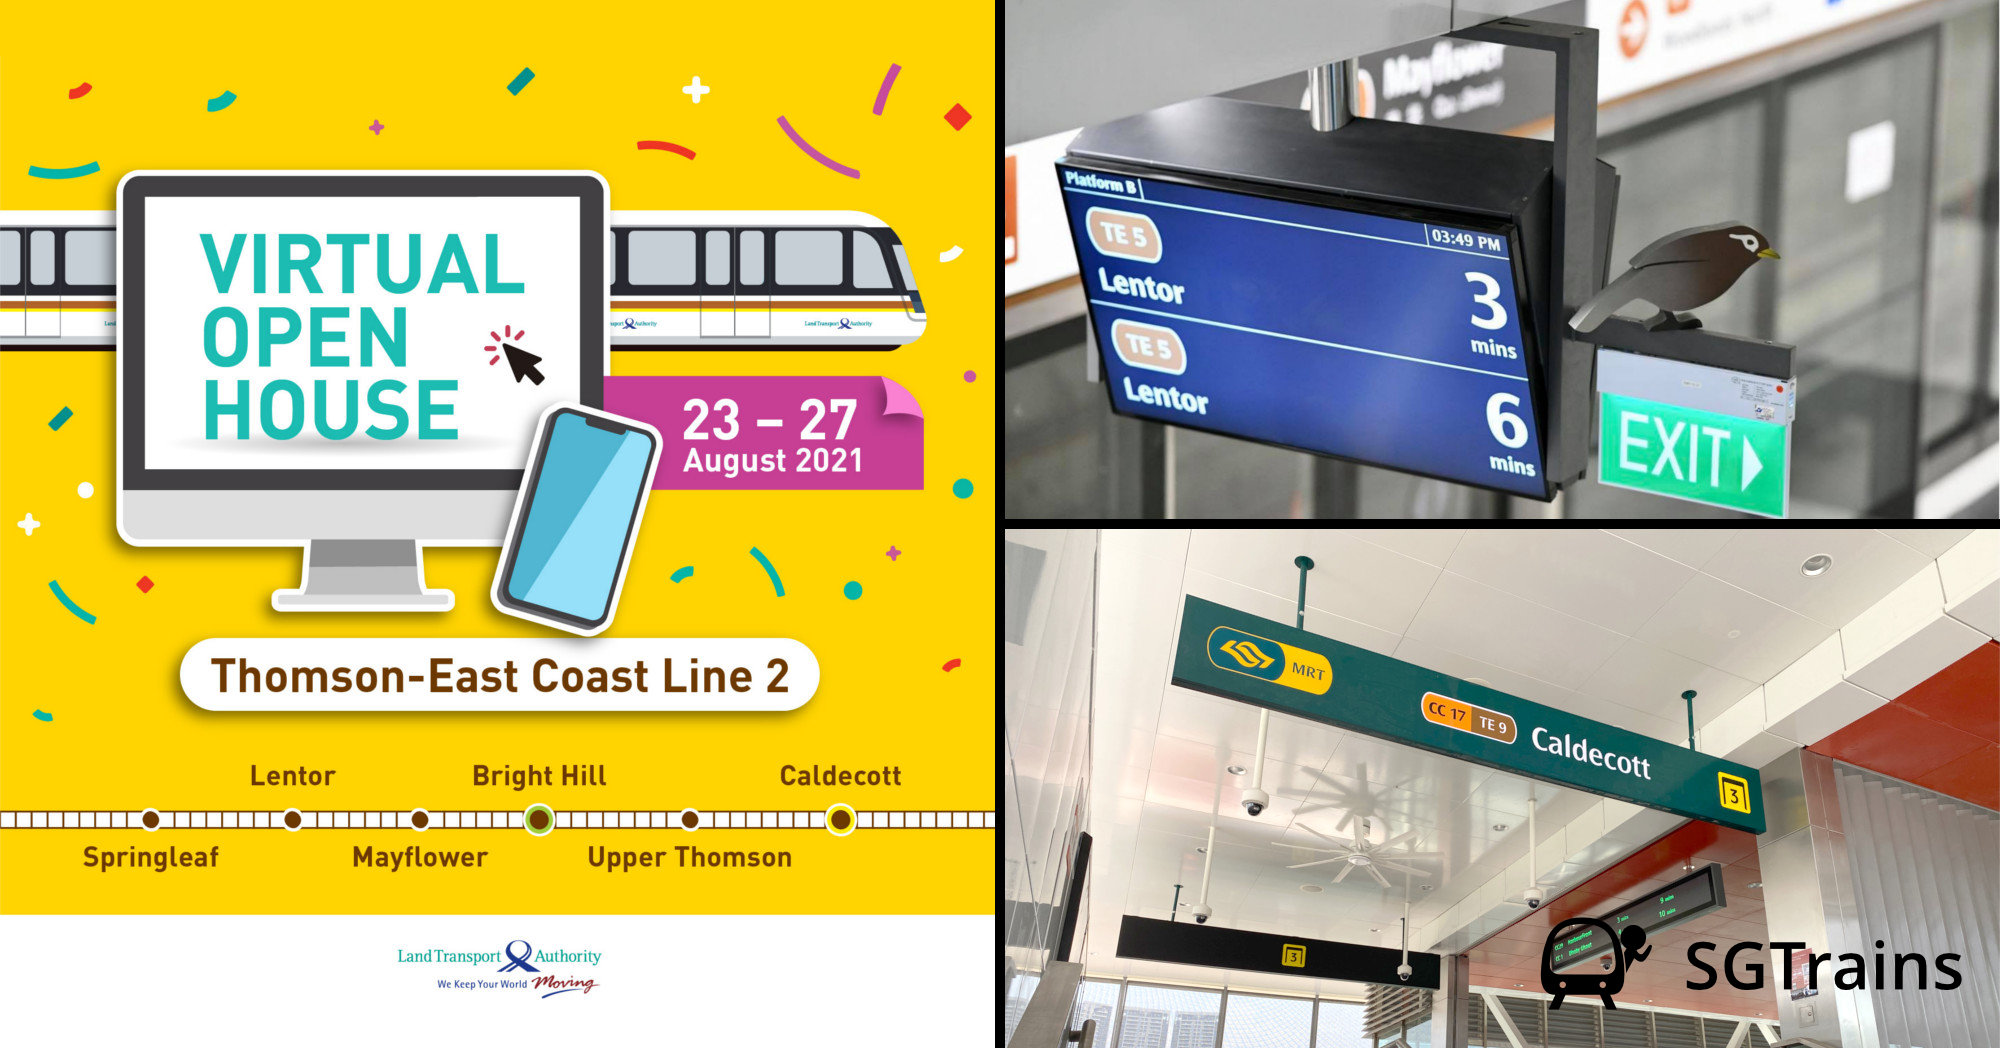 Virtual Open House for Thomson-East Coast Line 2 from Aug 23 to 27